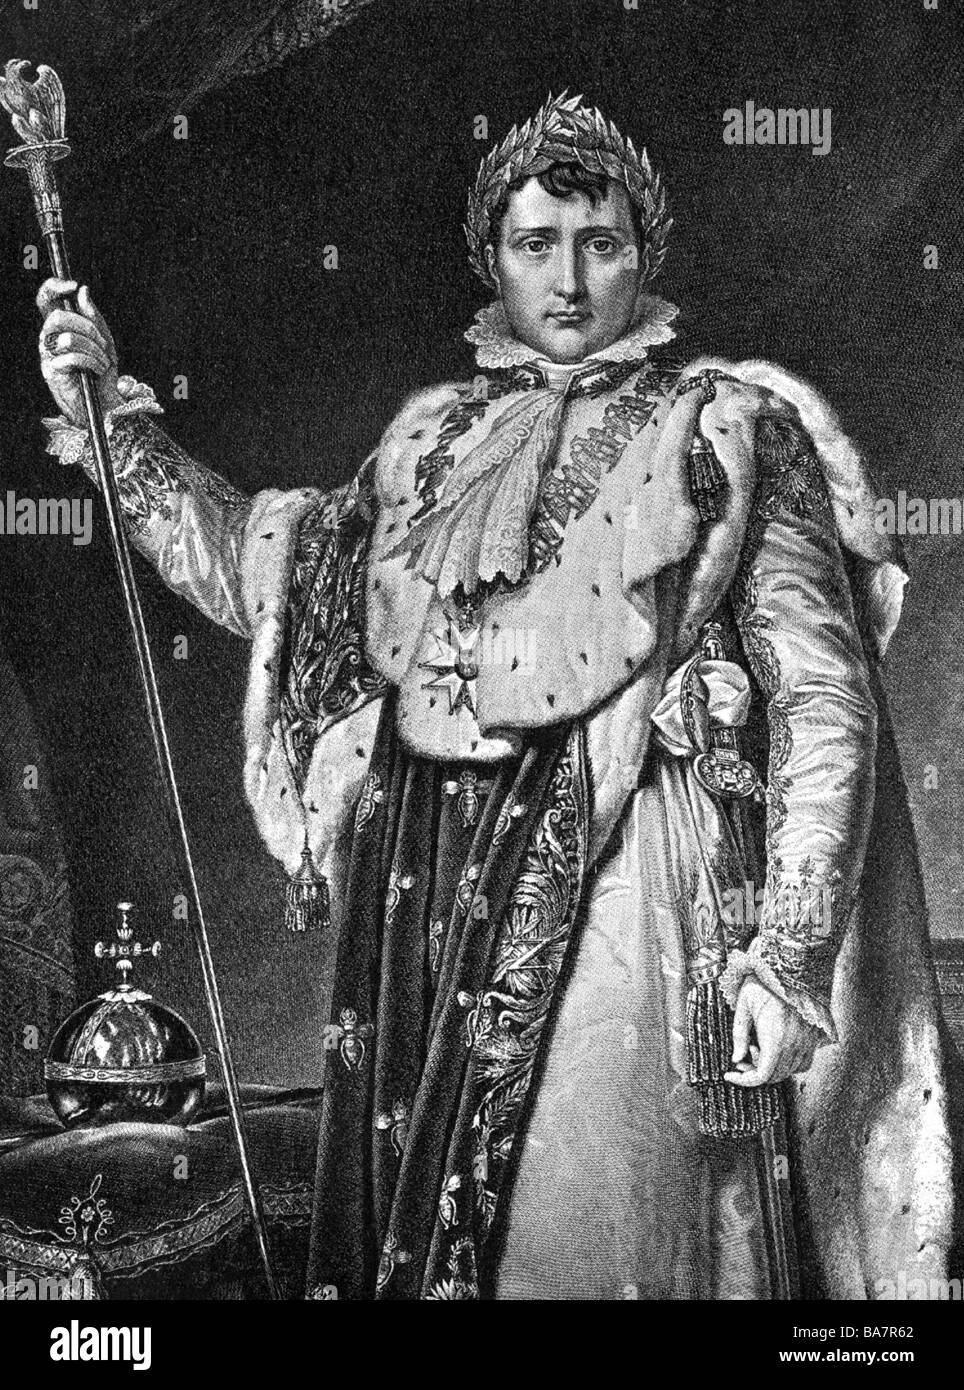 Napoleon I, 15.8.1769 - 5.5. 1821, Emperor of the French 2.12.1804 - 22.6.1815, in coronation regalia, copper engraving by Schuler and Metzeroth, 1805,  , Artist's Copyright has not to be cleared Stock Photo